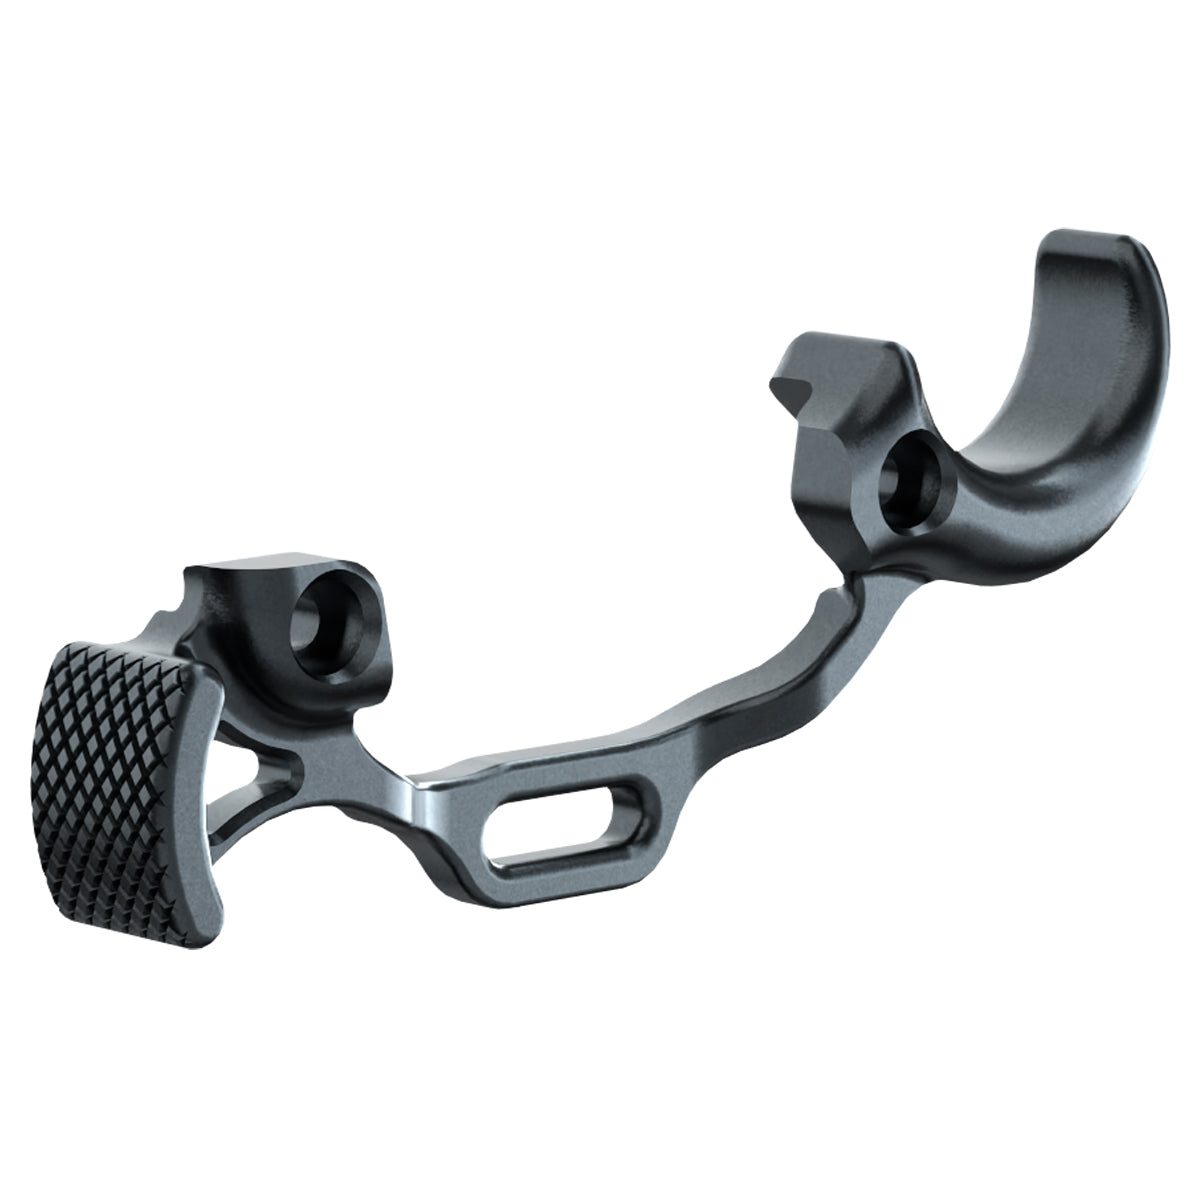 Ultraview Archery The Hinge 2 - Hunting Bracket in  by GOHUNT | Ultraview Archery - GOHUNT Shop